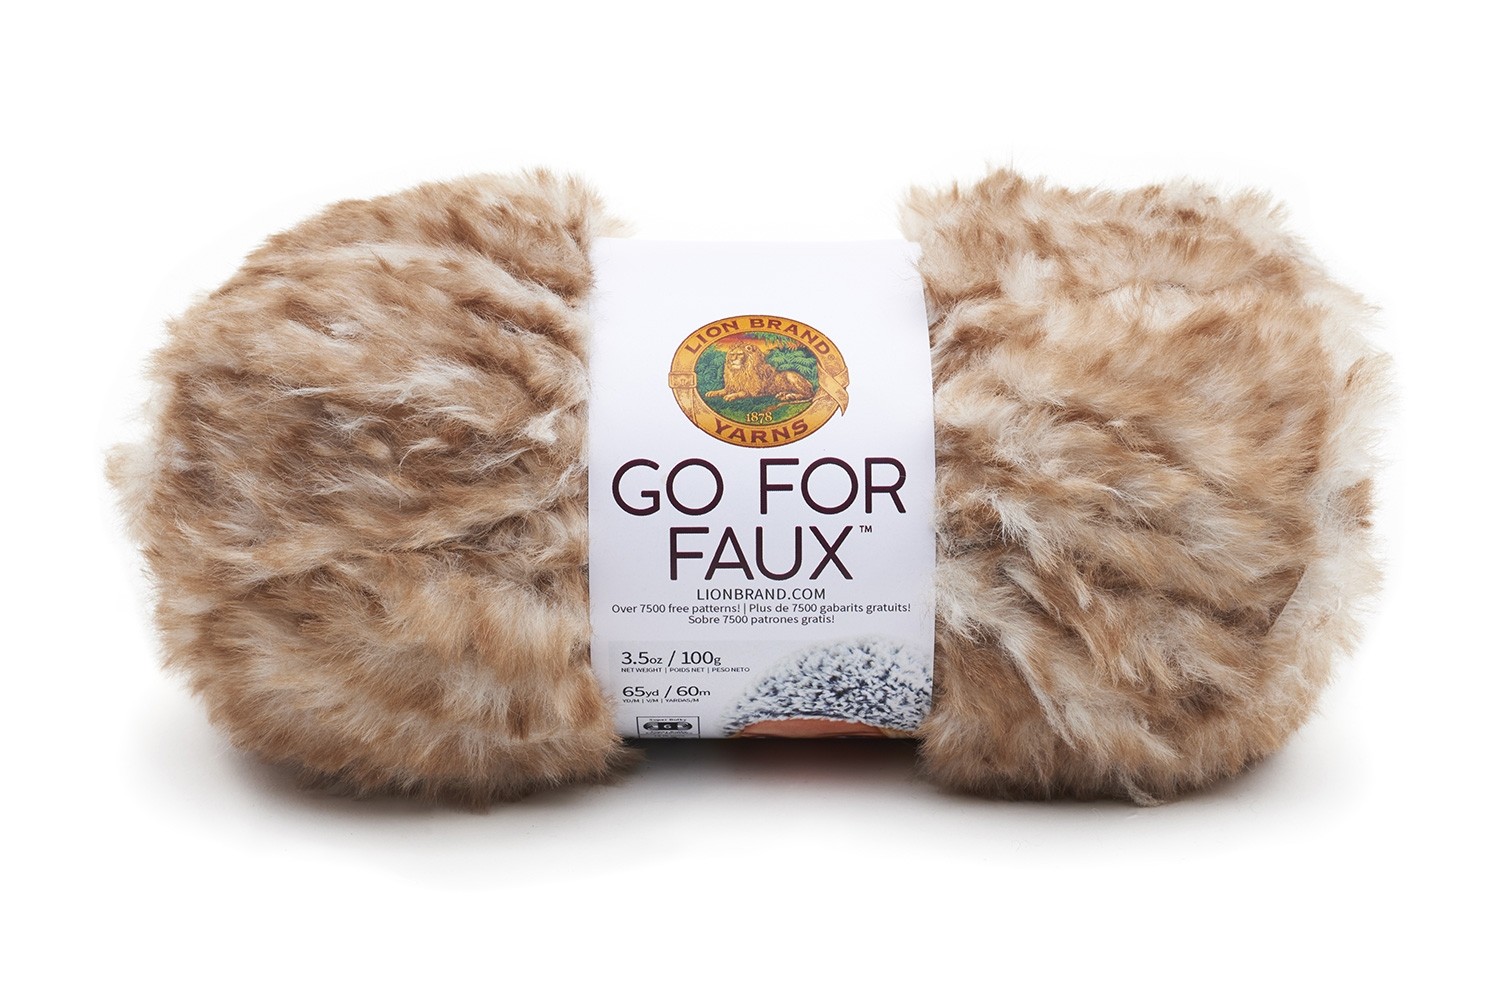 Lion Brand Go for Faux 64yds Super Bulky Polyester Yarn